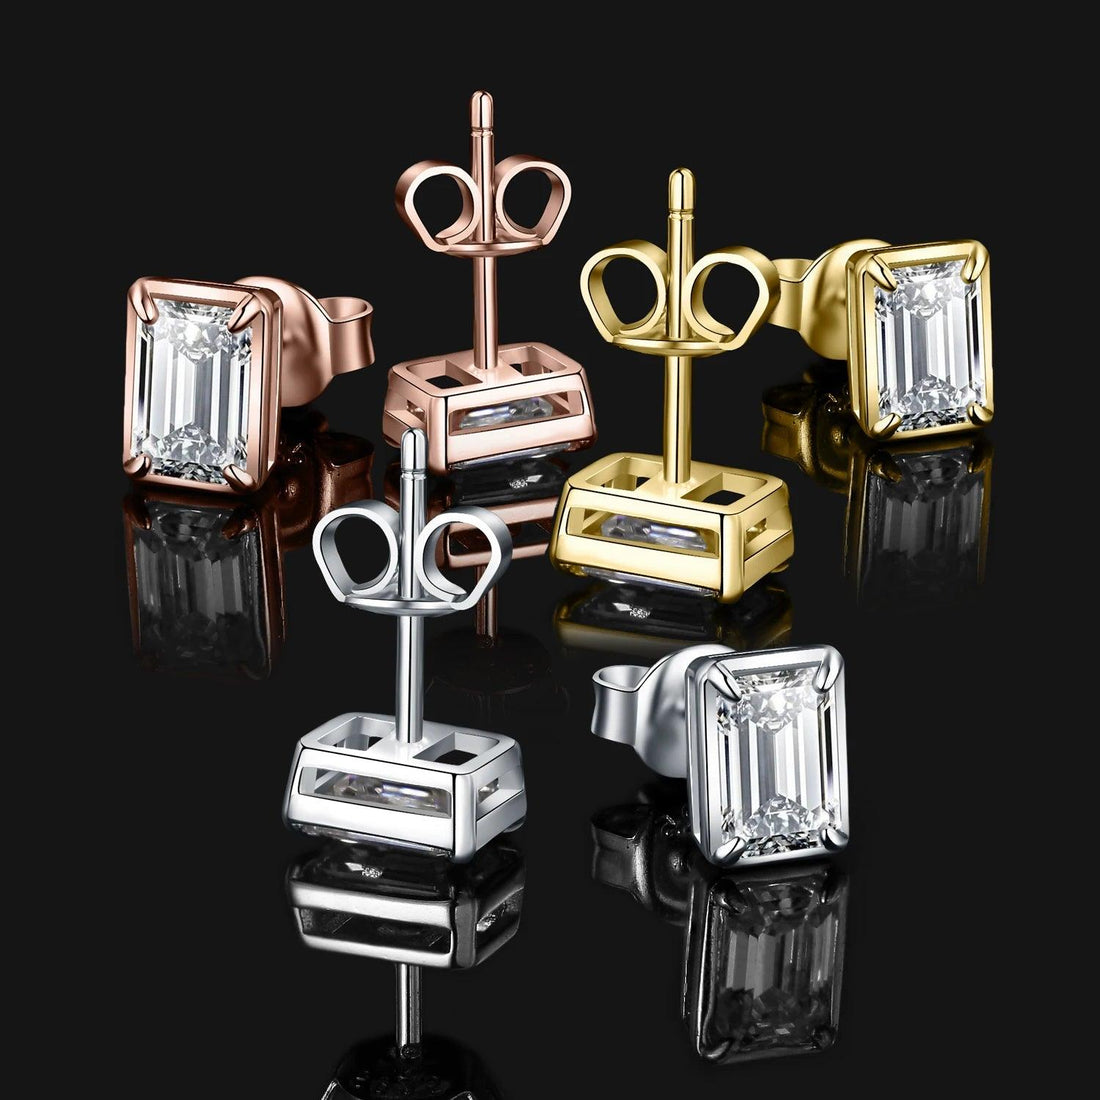 JPCJ233 Stud Earrings Charm Jewelry - 925 Sterling Silver Moissanite D Color - Touchy Style